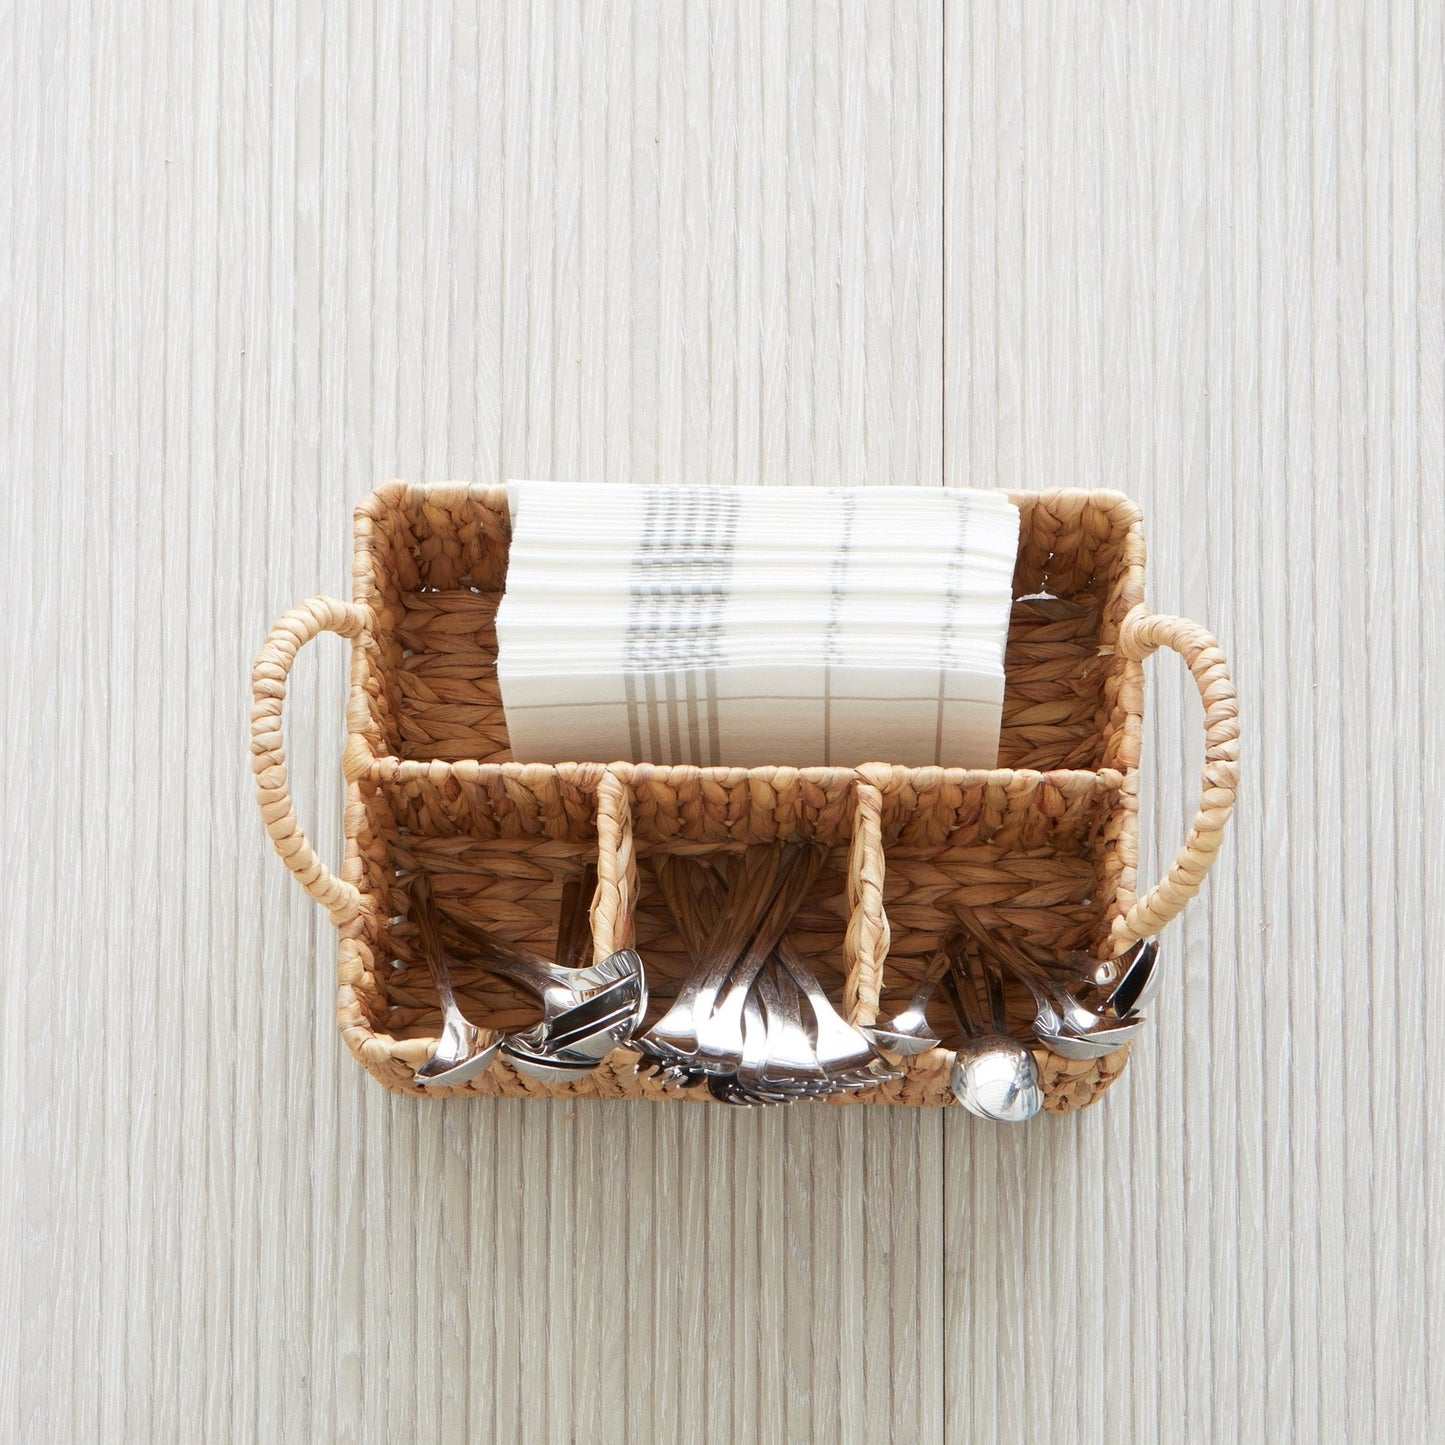 Woven Divided Basket